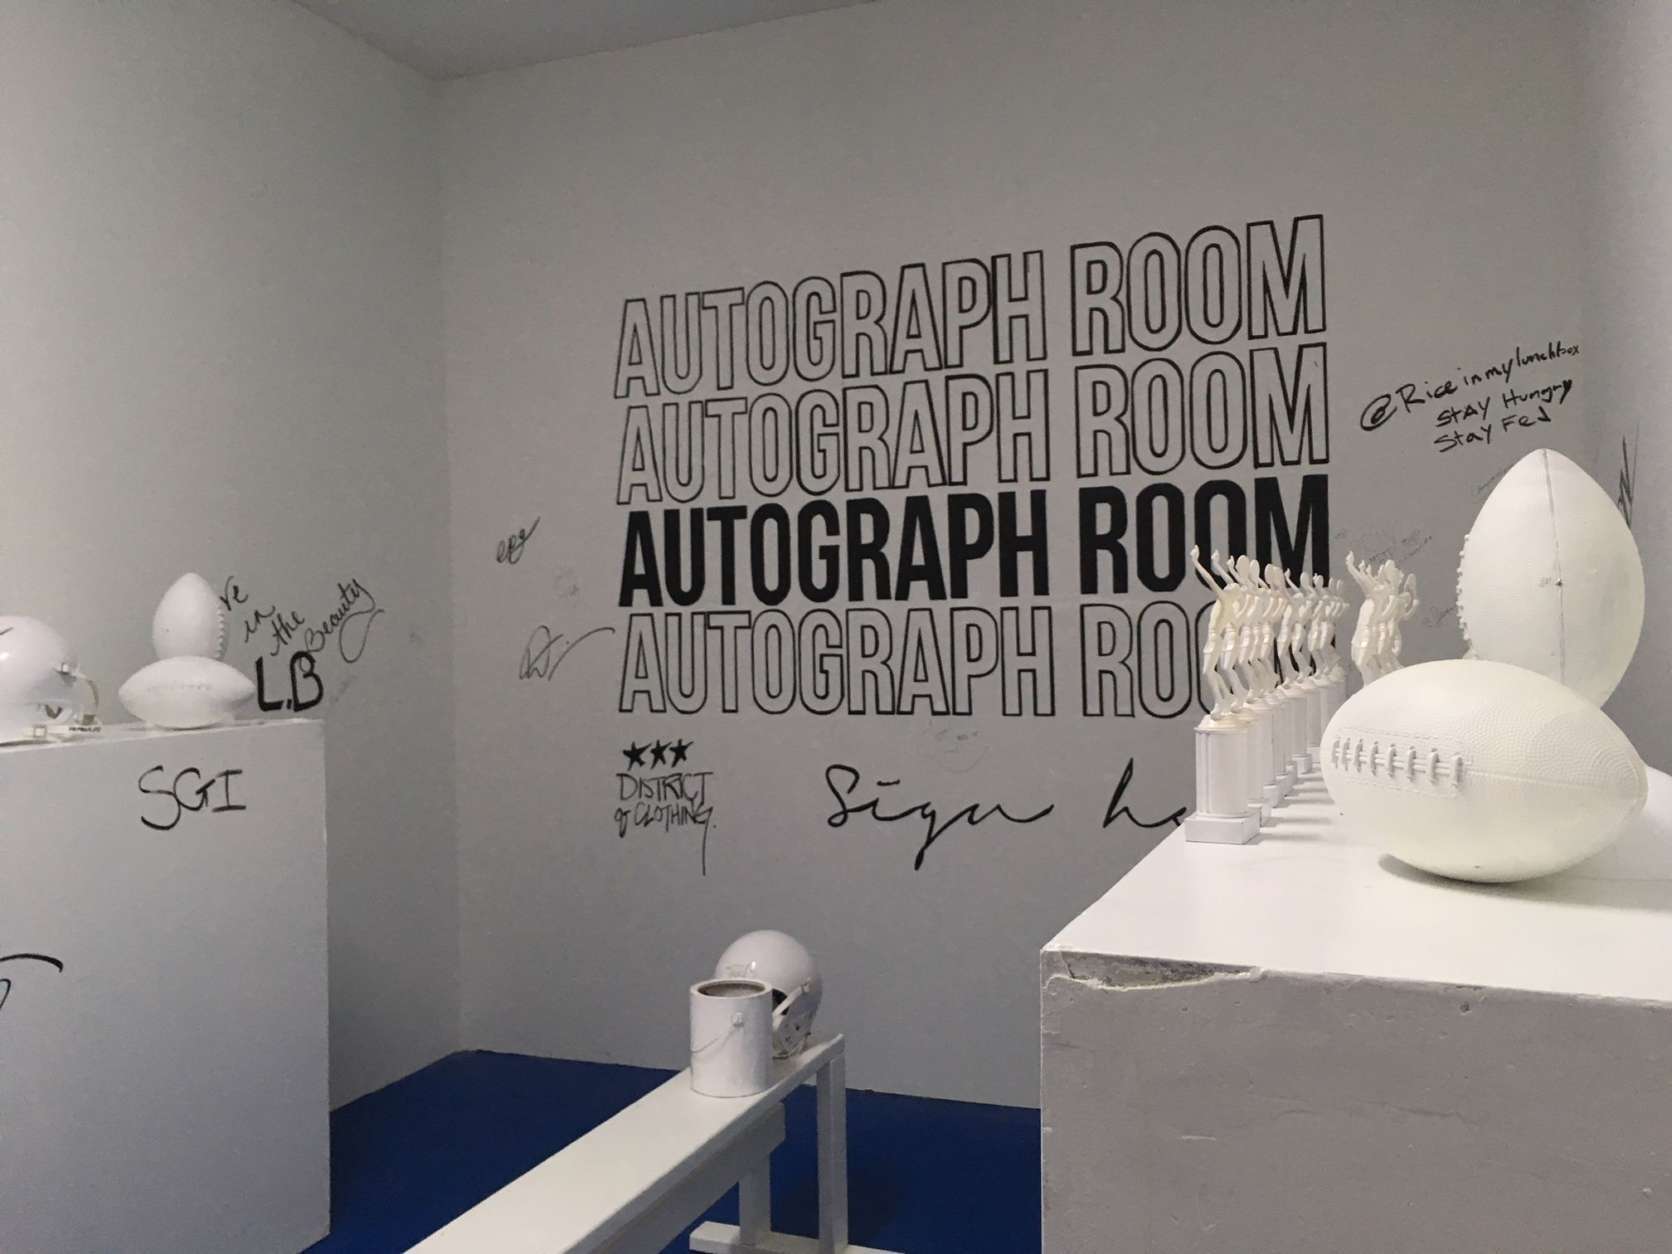 The autograph room gives visitors a chance to leave their mark, literally, with lockers, equipment and walls all available to sign. (WTOP/Noah Frank)